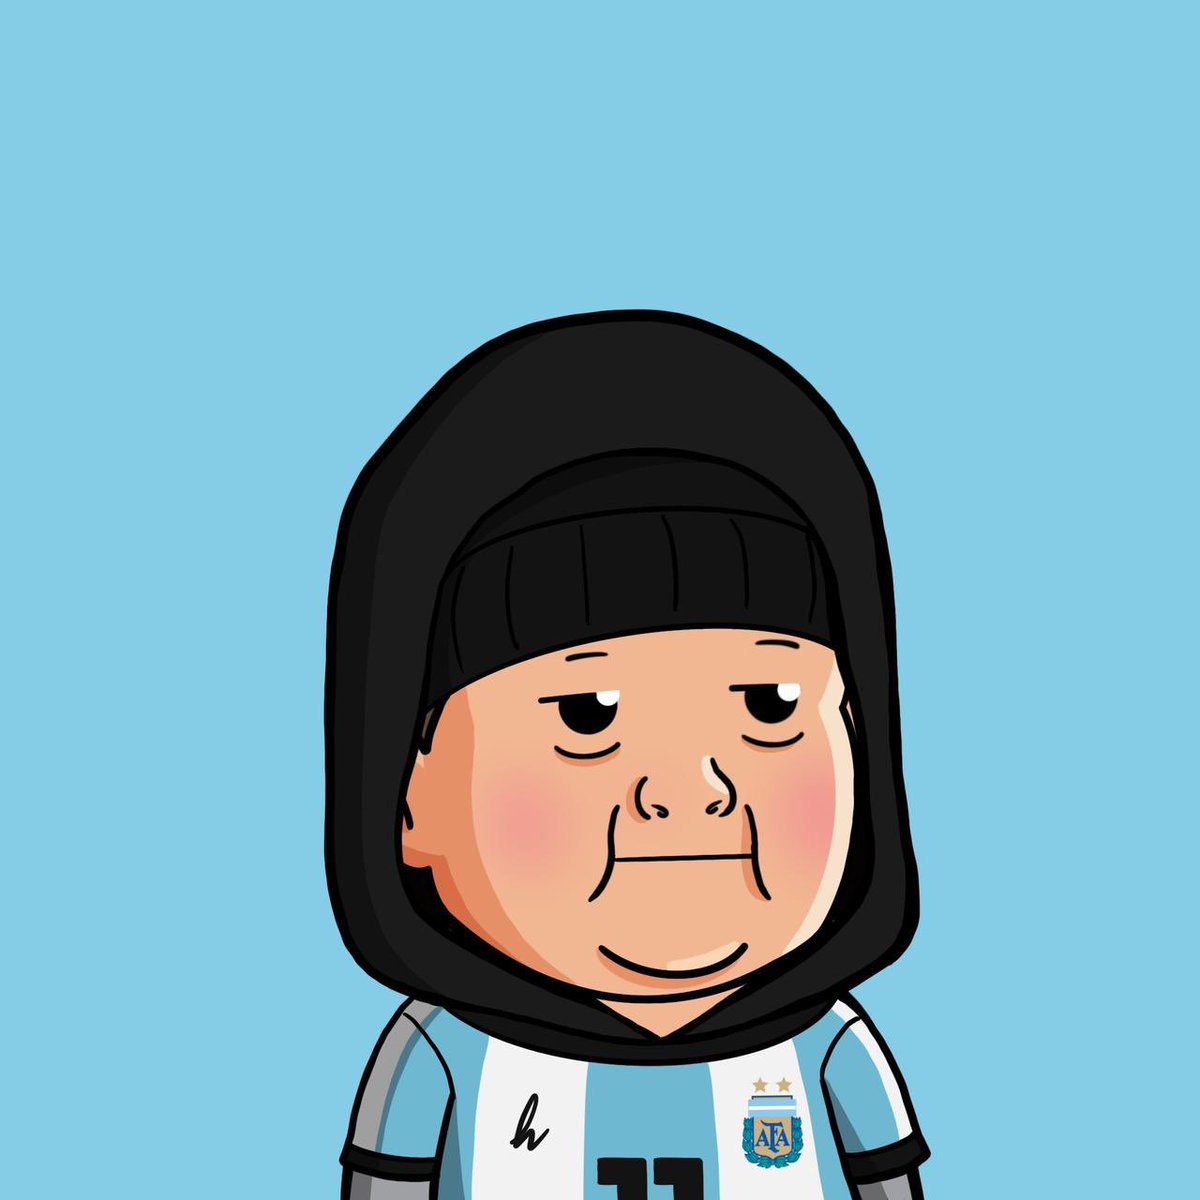 That’s my 🎁 for @LuquitaRodrigue. Thanks for introduce me to the best spanish-speakers community. 

Welcome to Crypto Hasbulla ❤️❤️❤️❤️
#VamosArgentina